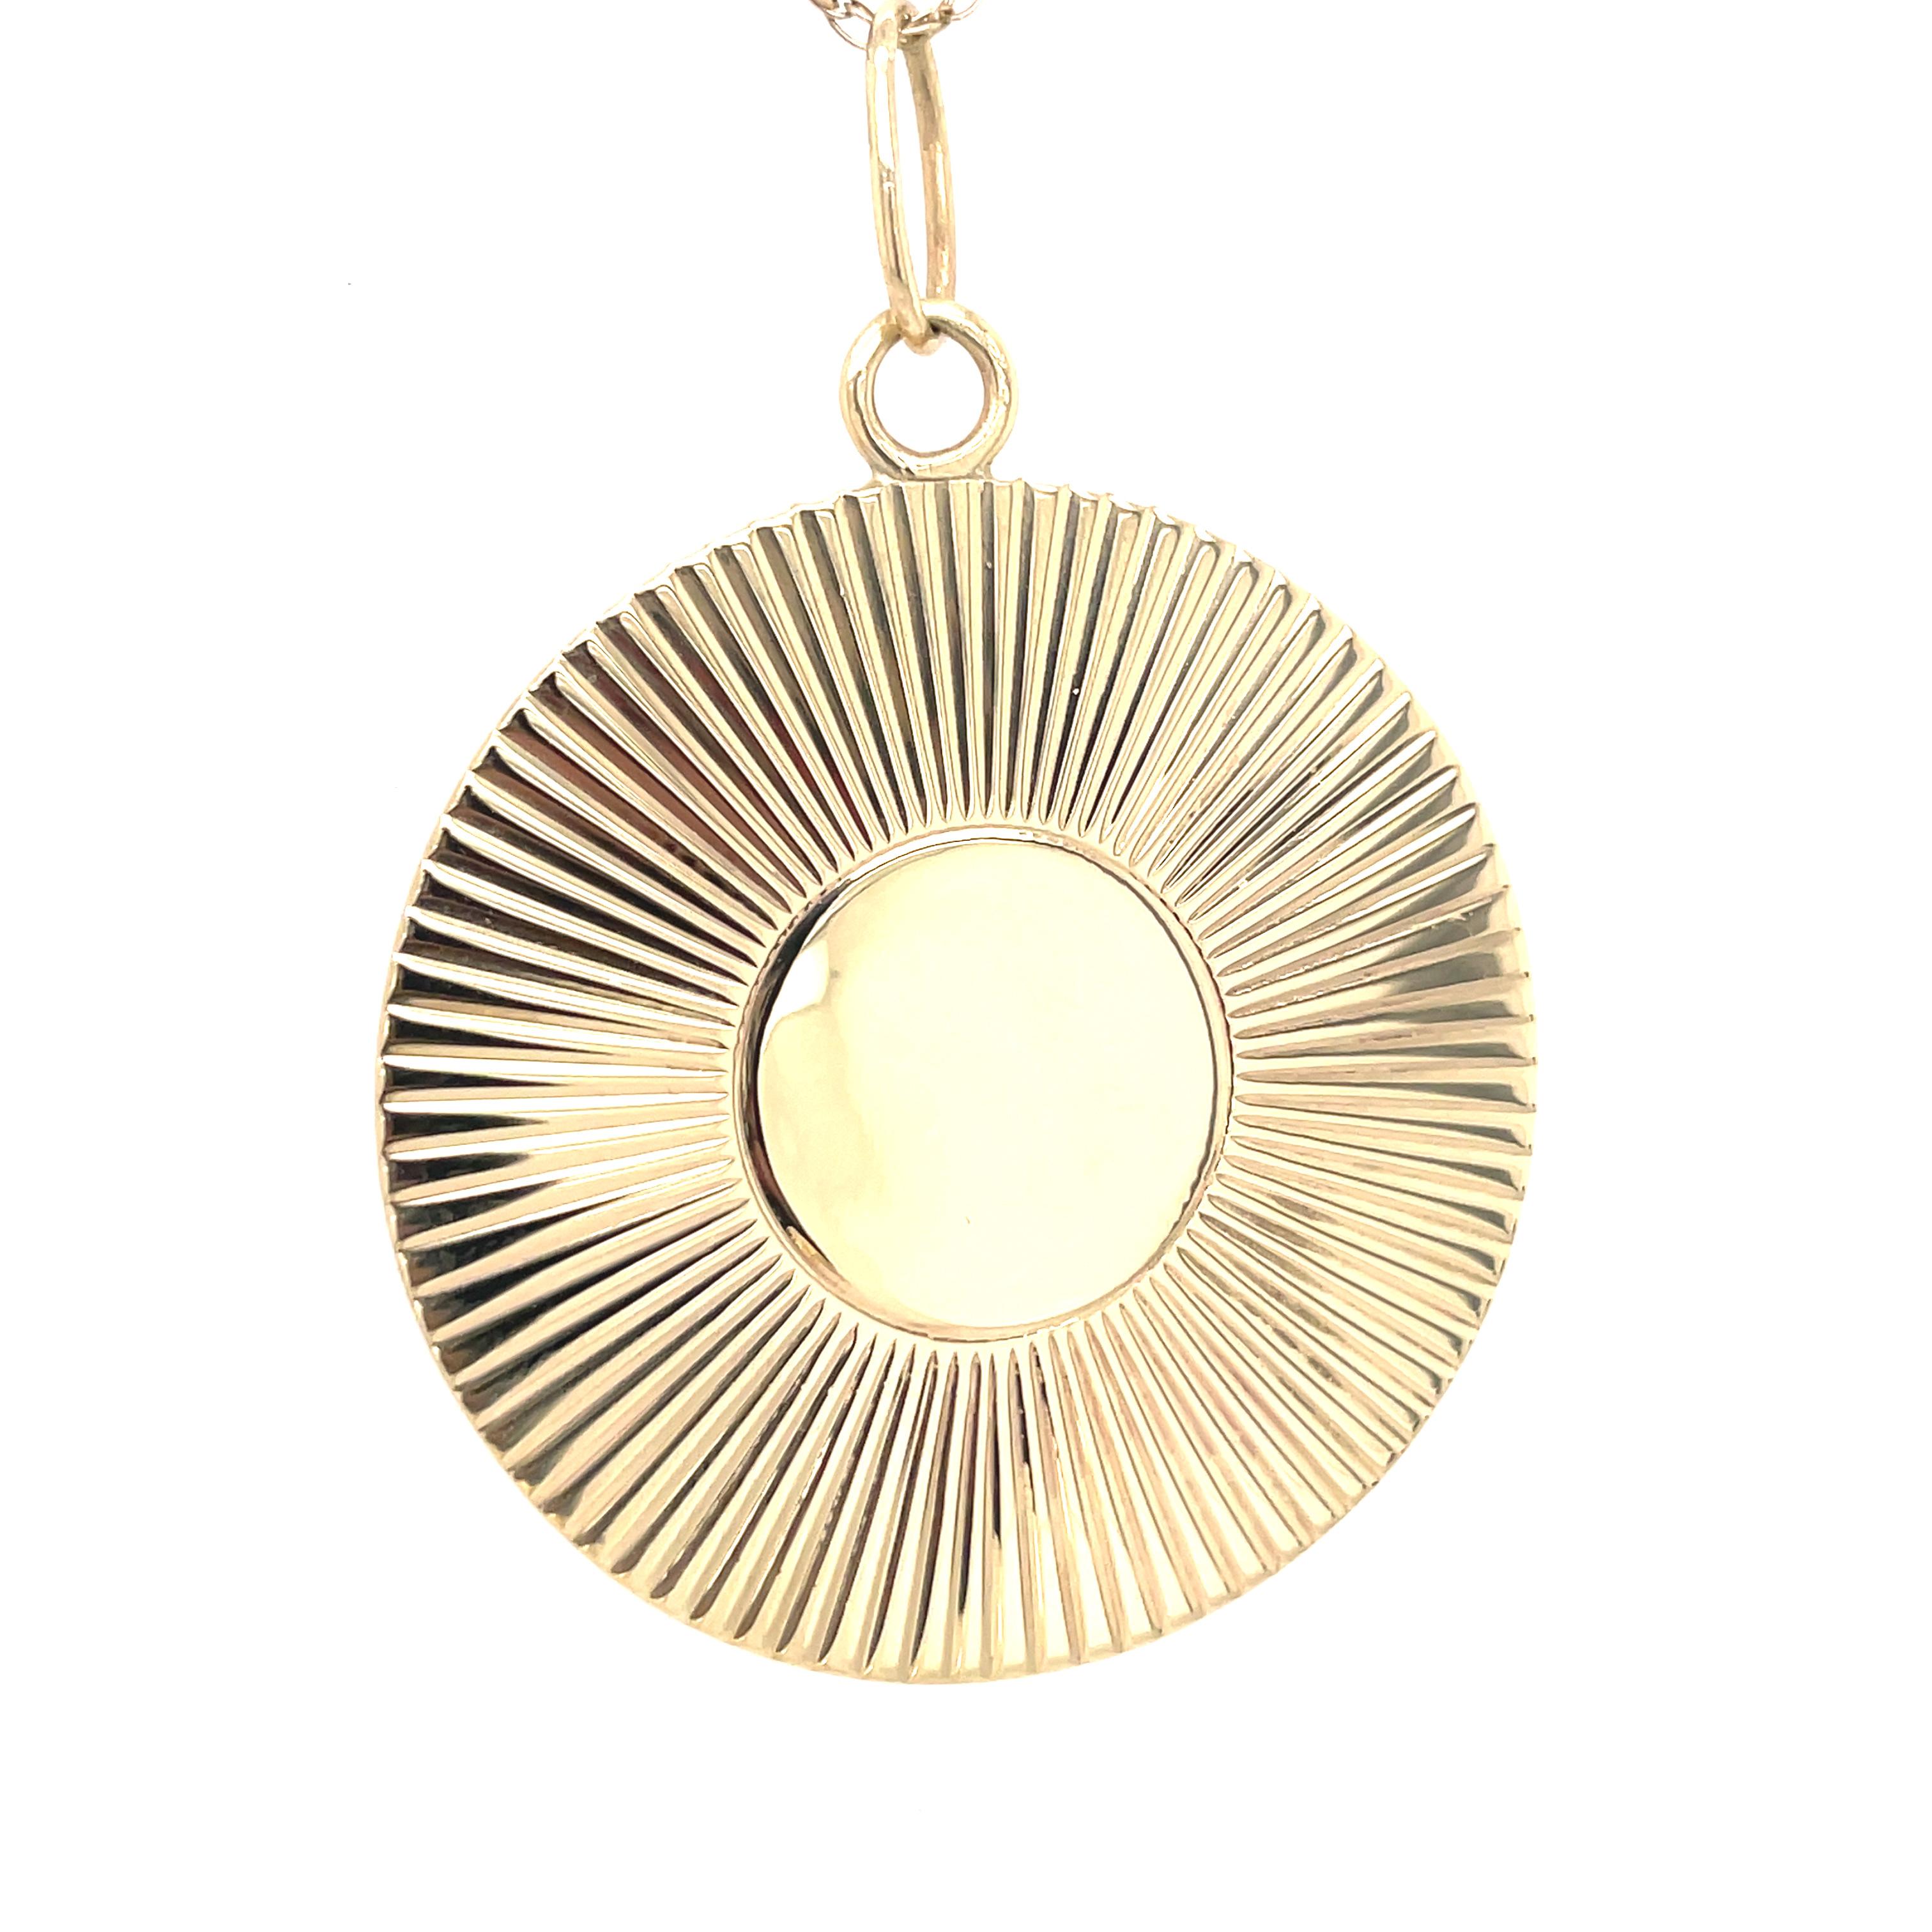 Very large round pendant/medallion/charm. Solid gauge 14K yellow gold. There is a fine-line pattern around the border.  The center reserve and the reverse side have never been engraved.  You can personalize by adding a hand-engraved monogram, date,